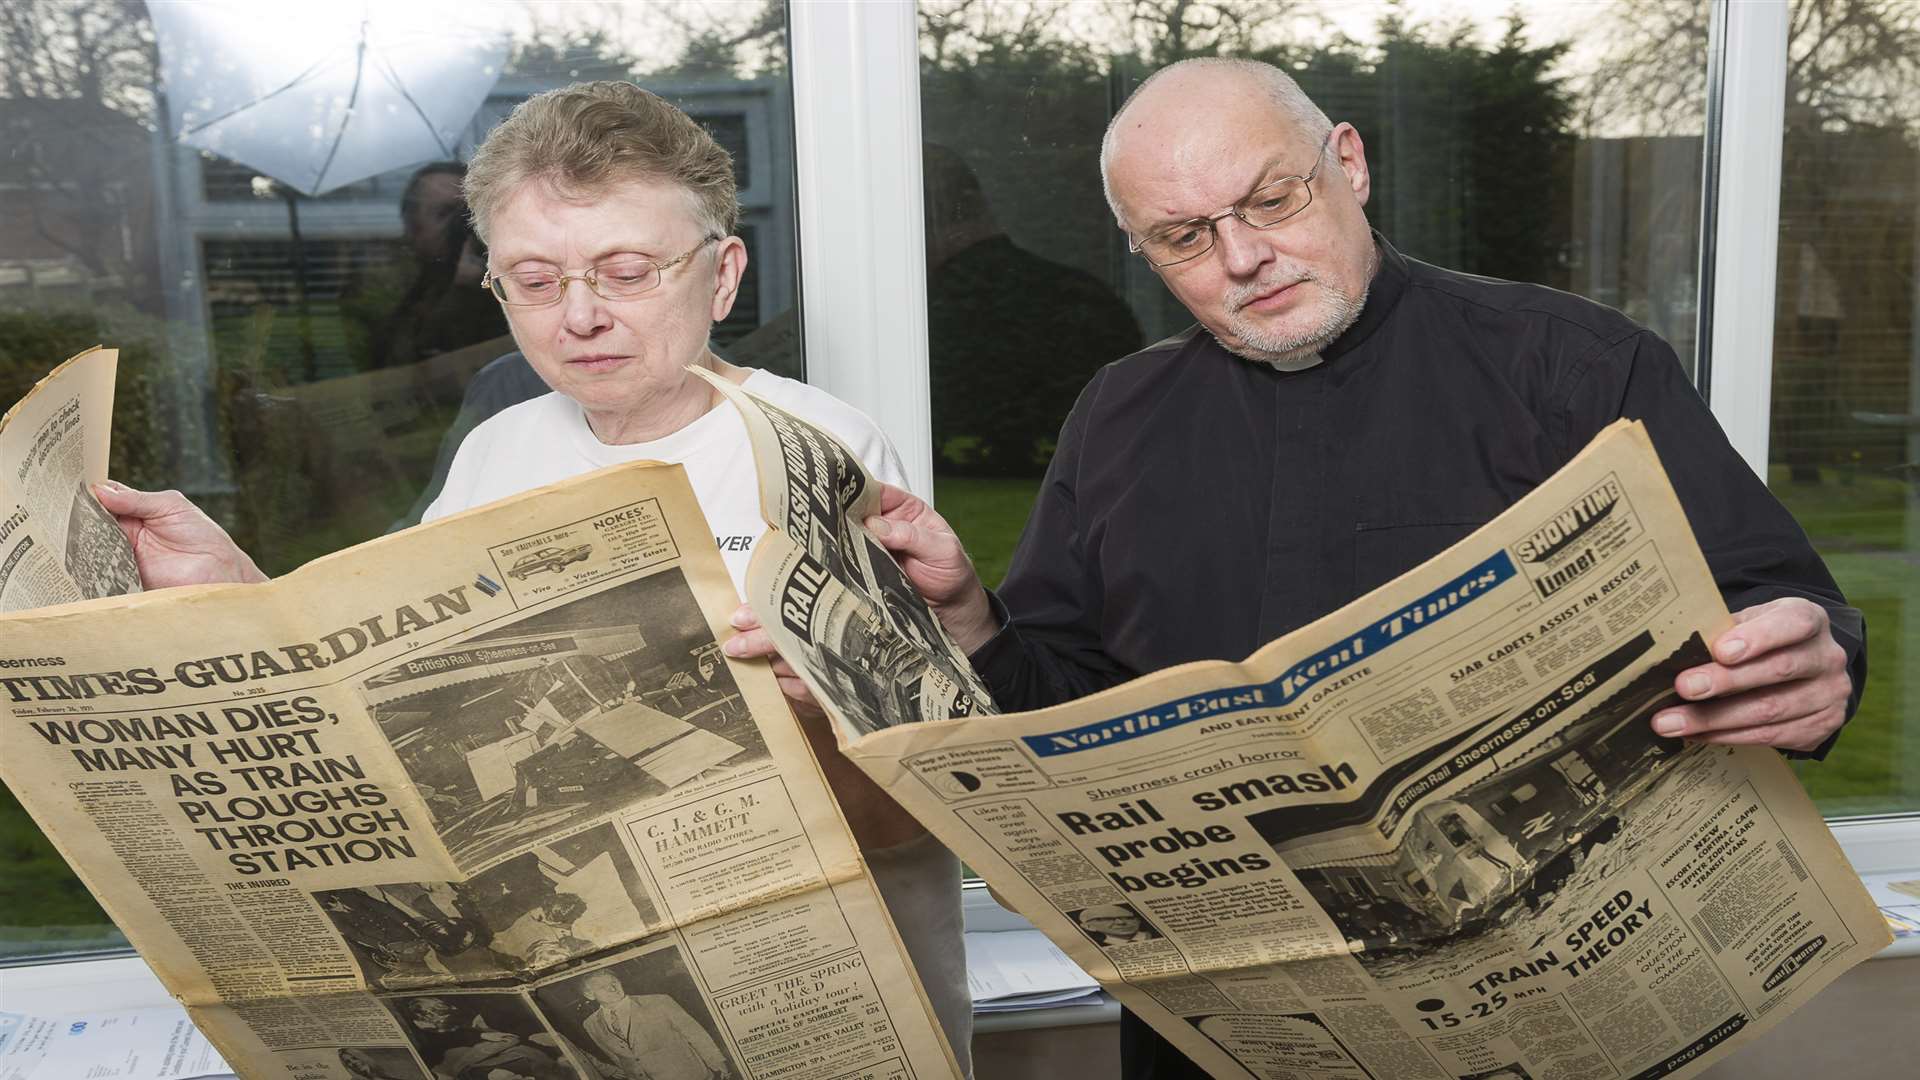 Colin and Lynne Johnson were married and reporters on rival newspapers at the time